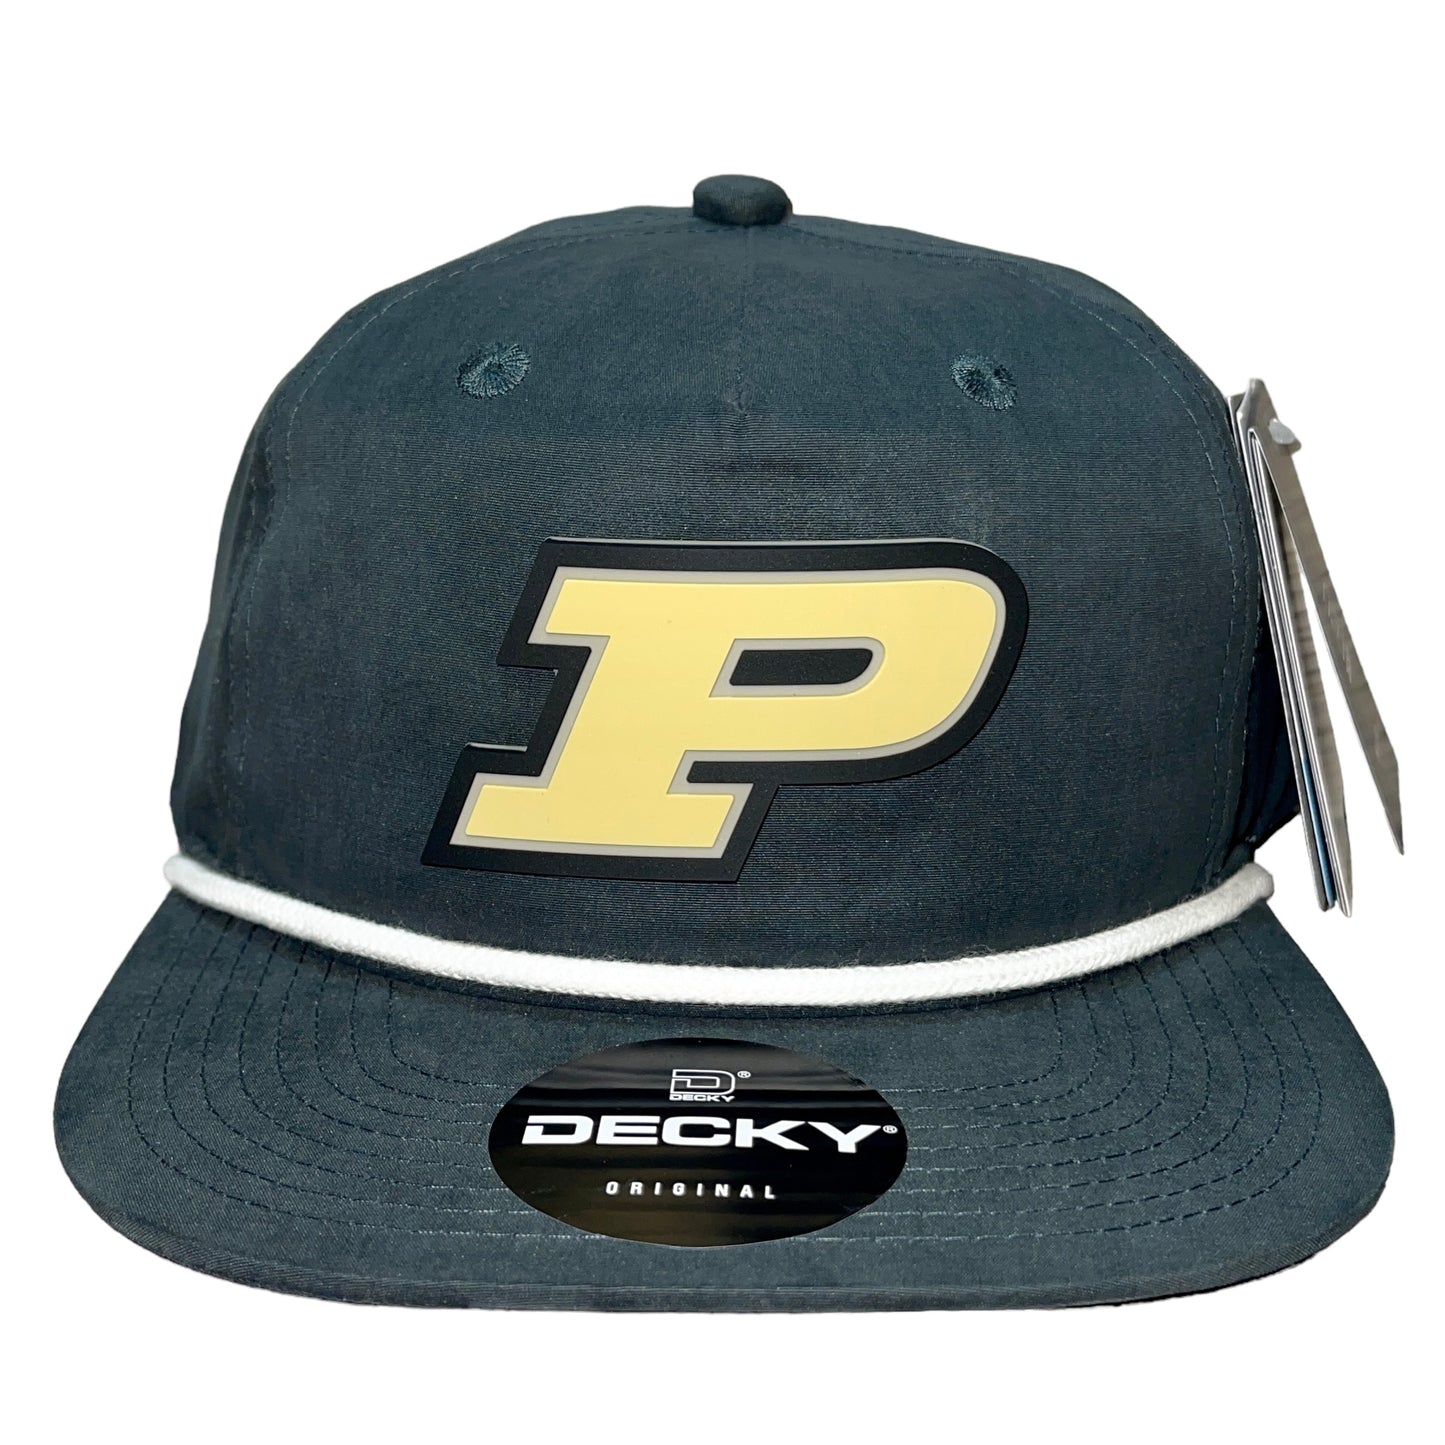 Purdue Boilermakers 3D Classic Rope Hat- Charcoal/ White - Ten Gallon Hat Co.